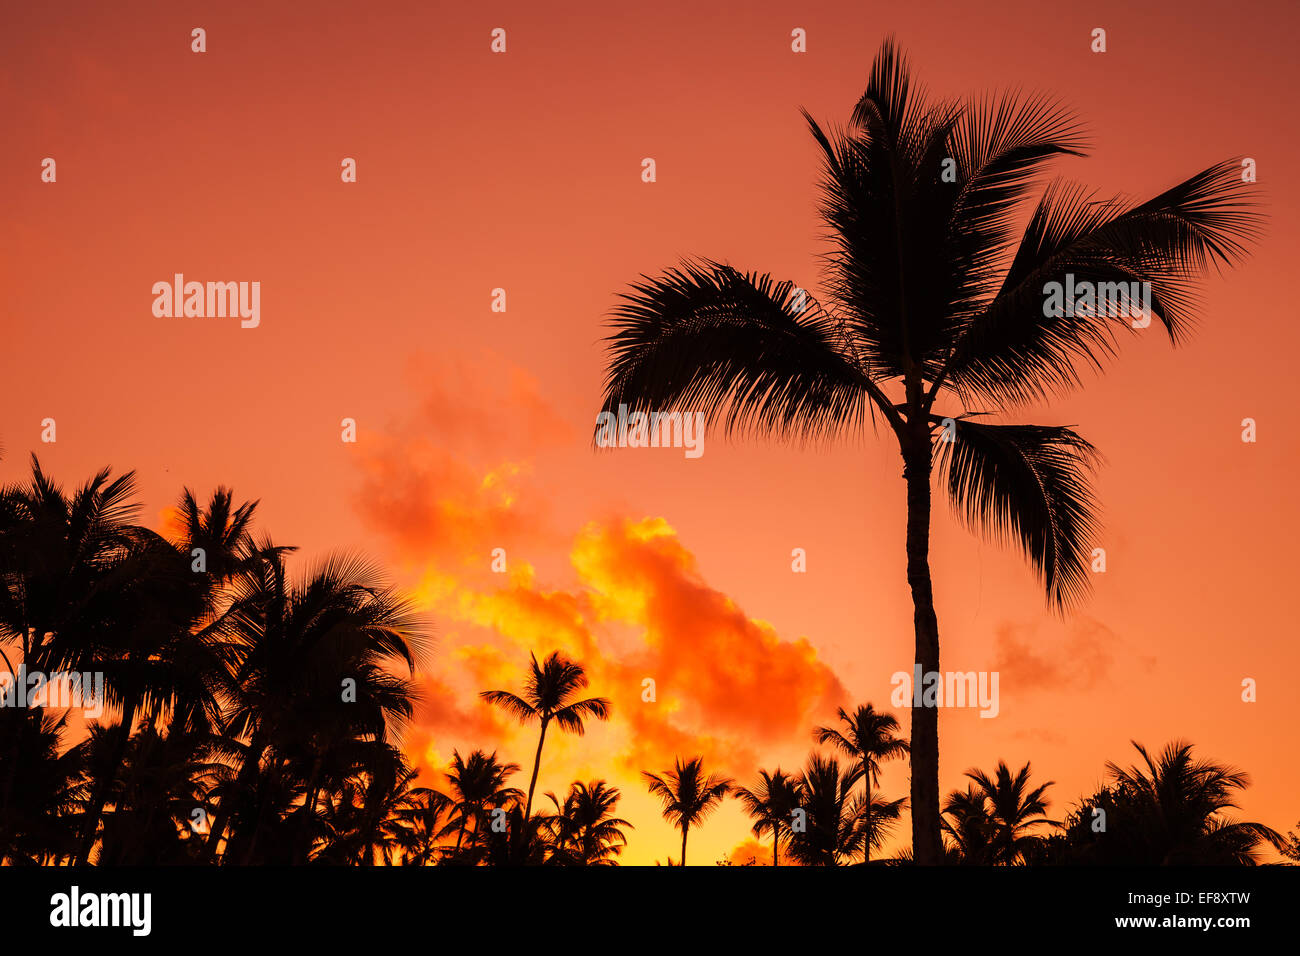 Coconut palm trees silhouettes over bright red sky. Natural photo background Stock Photo